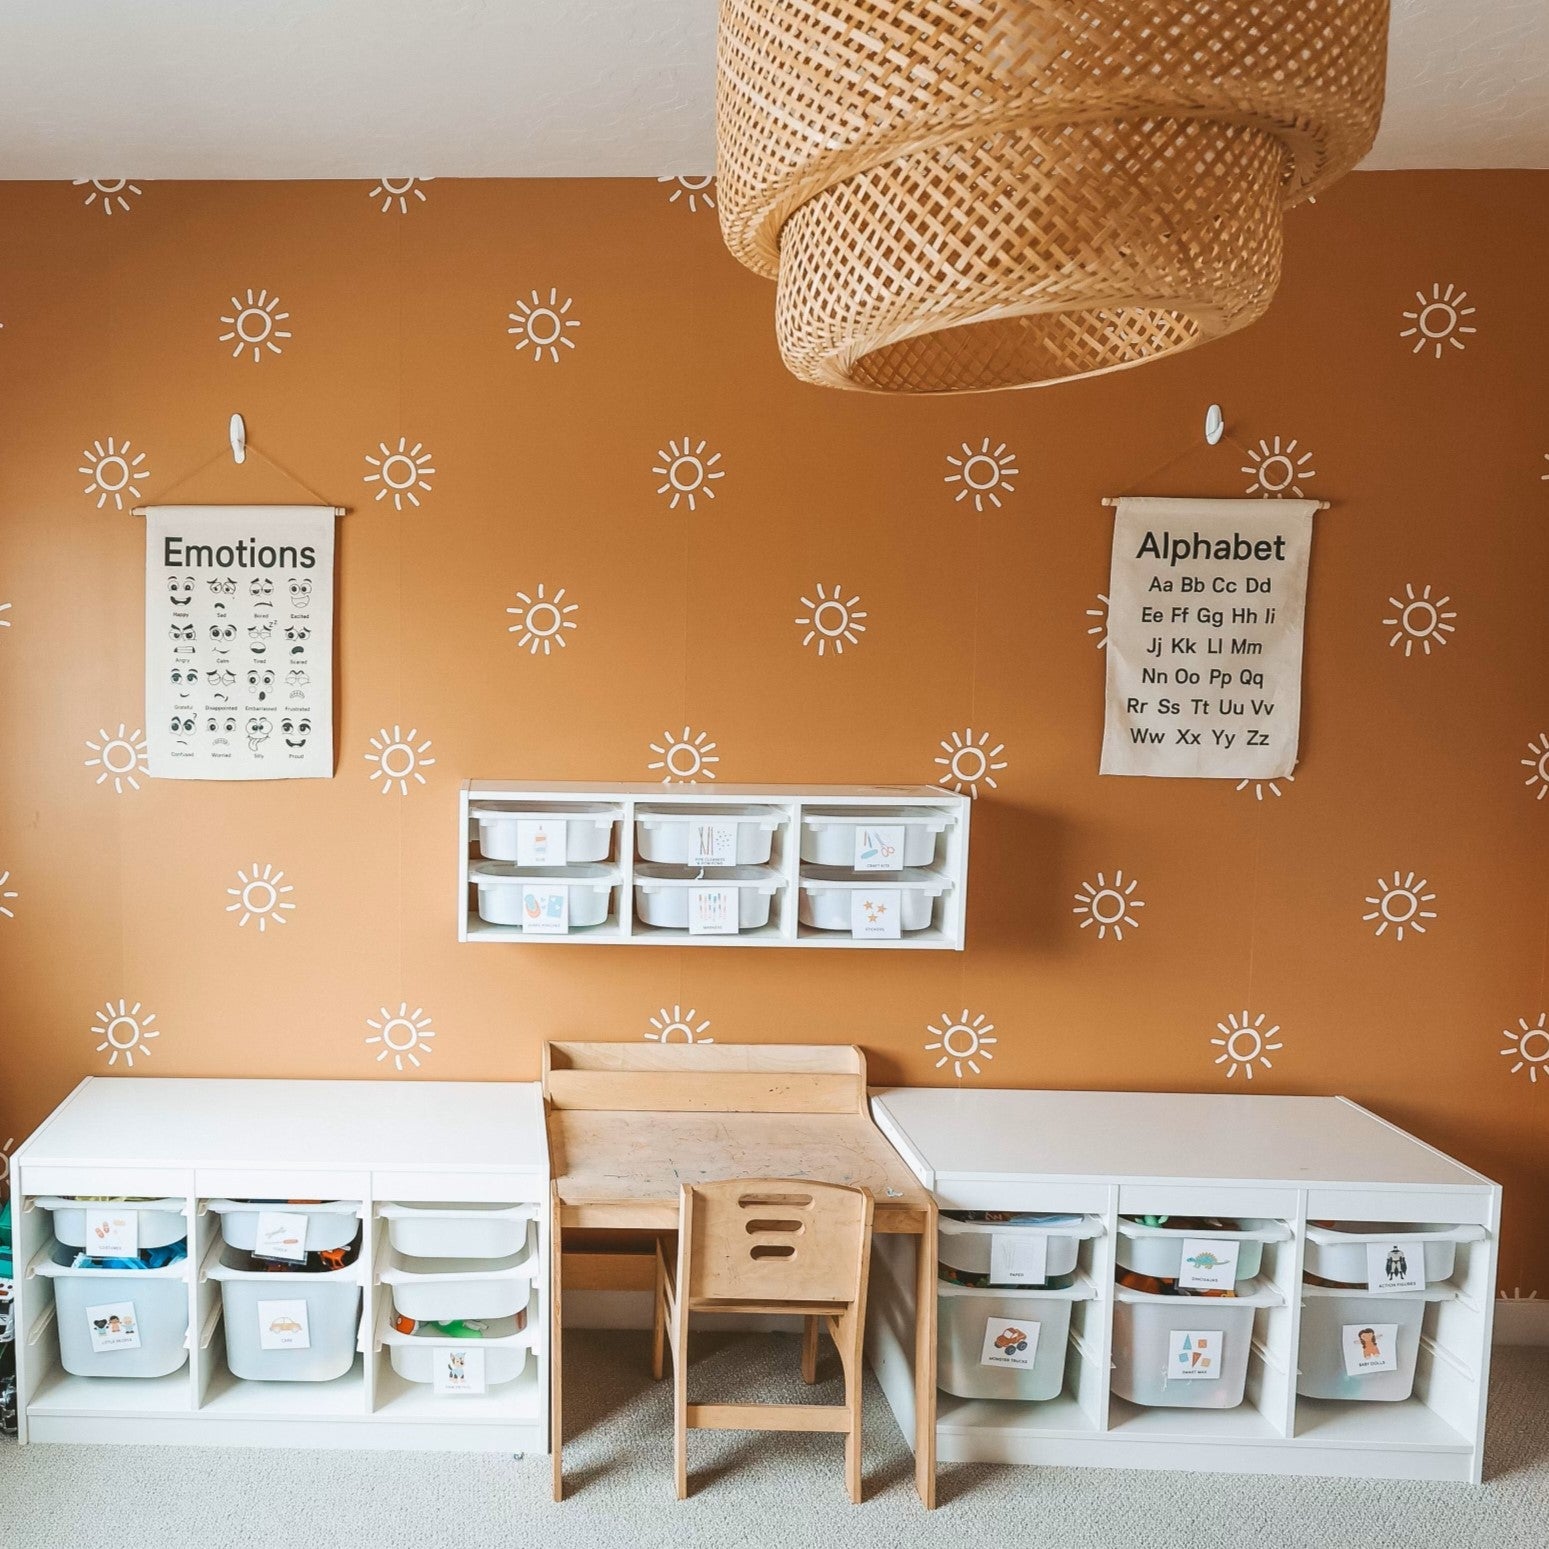 Children's learning space with terracotta walls adorned with sunburst decals, educational posters, and organized storage bins